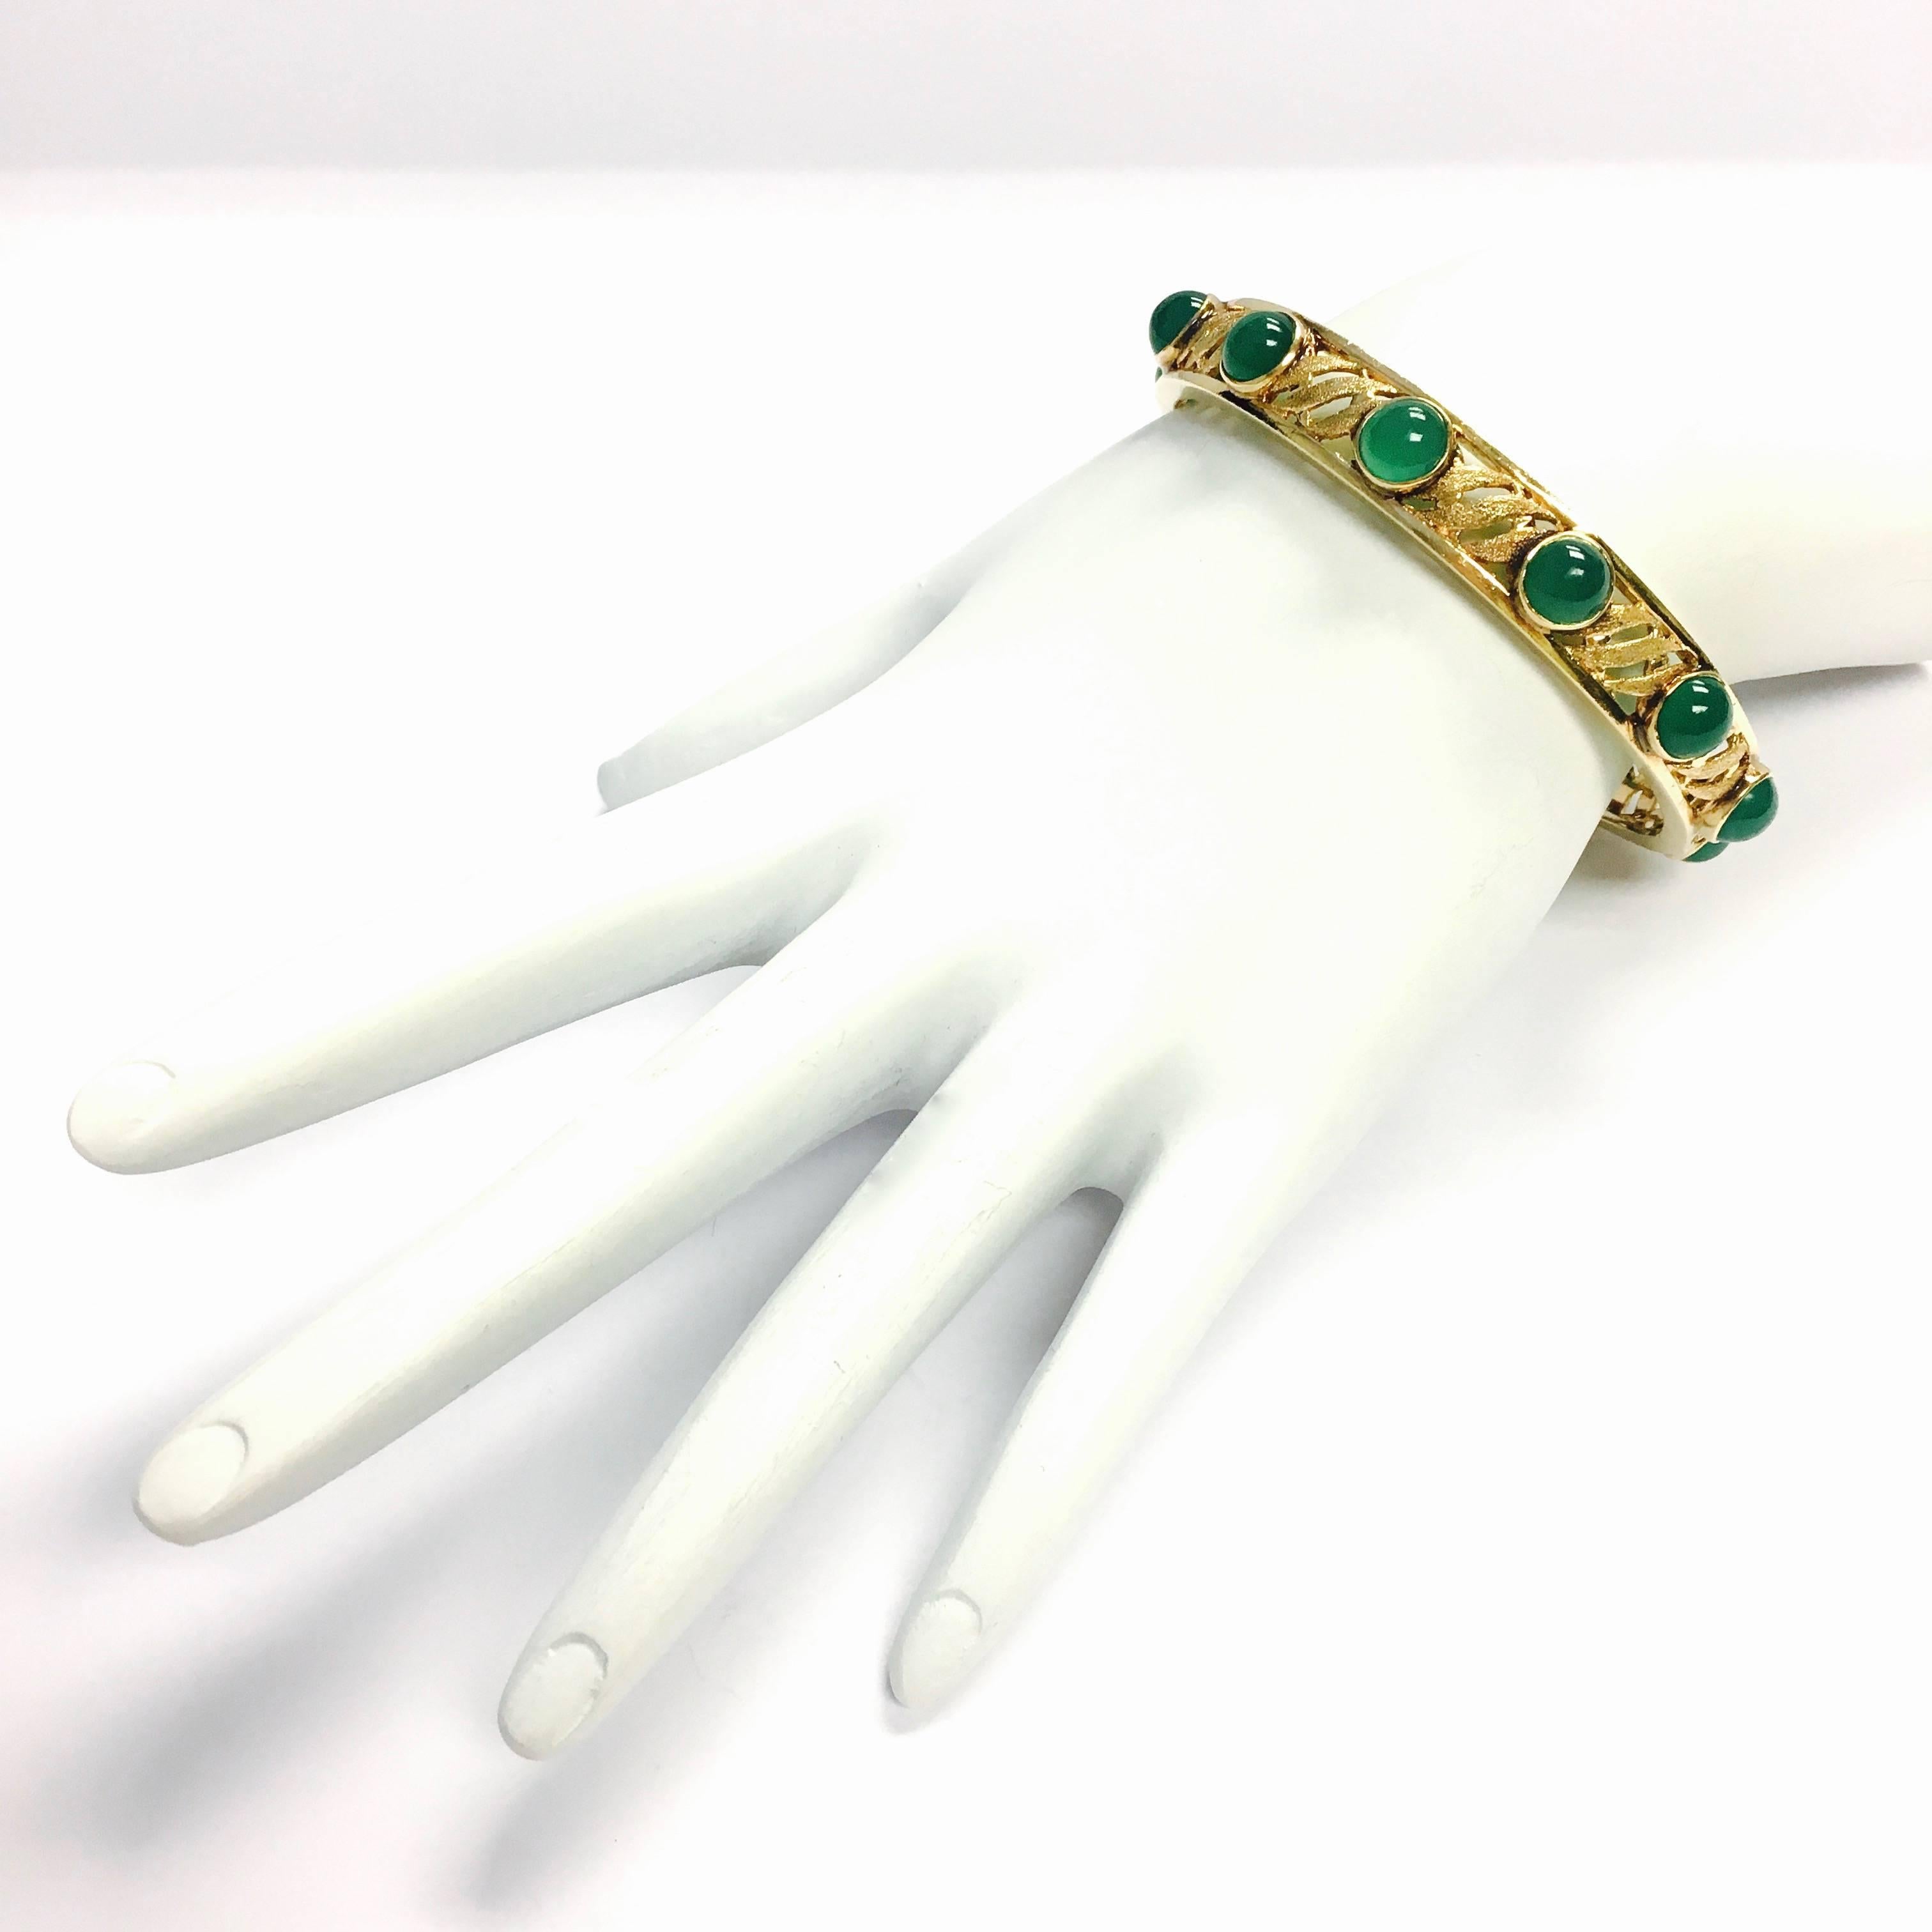 Ruser Vintage Green Chalcedony Gold Hinged Bangle Bracelet In Excellent Condition For Sale In Agoura Hills, CA